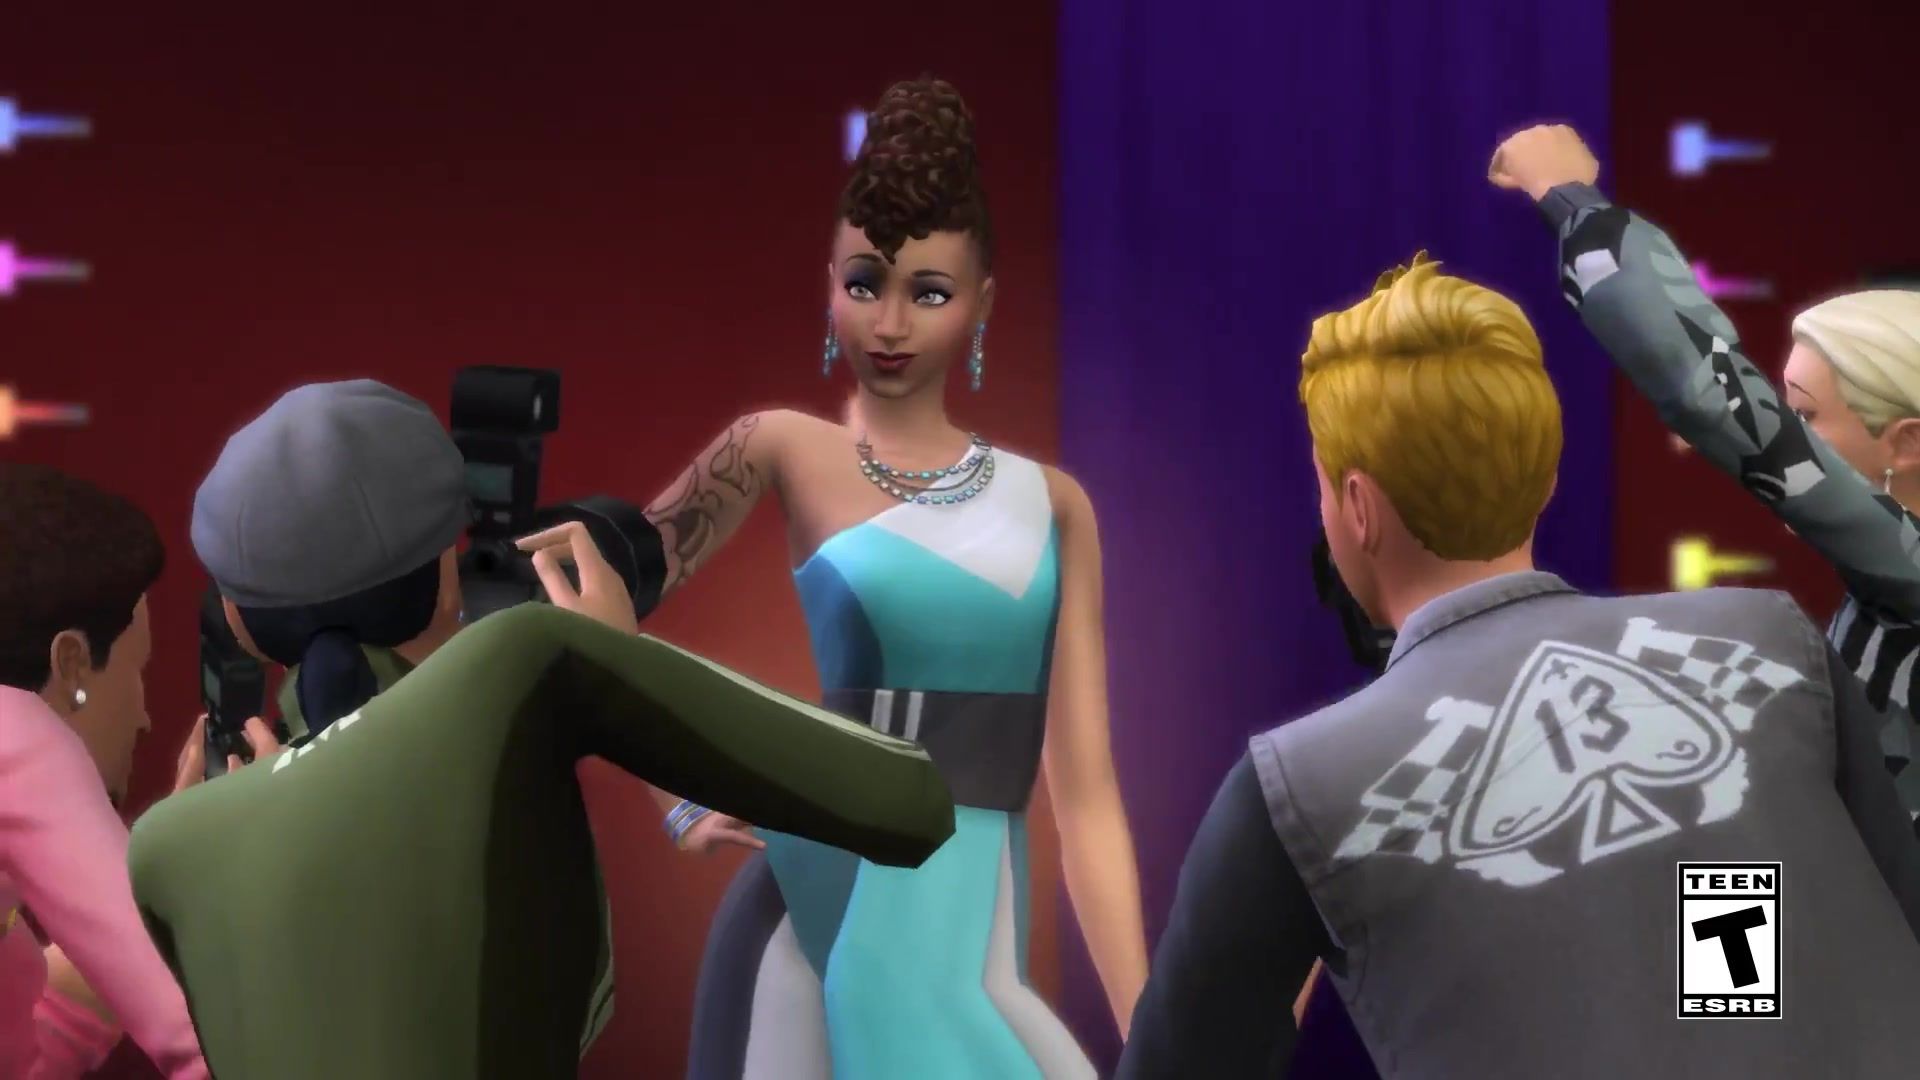 sims 4 get famous utorrent download